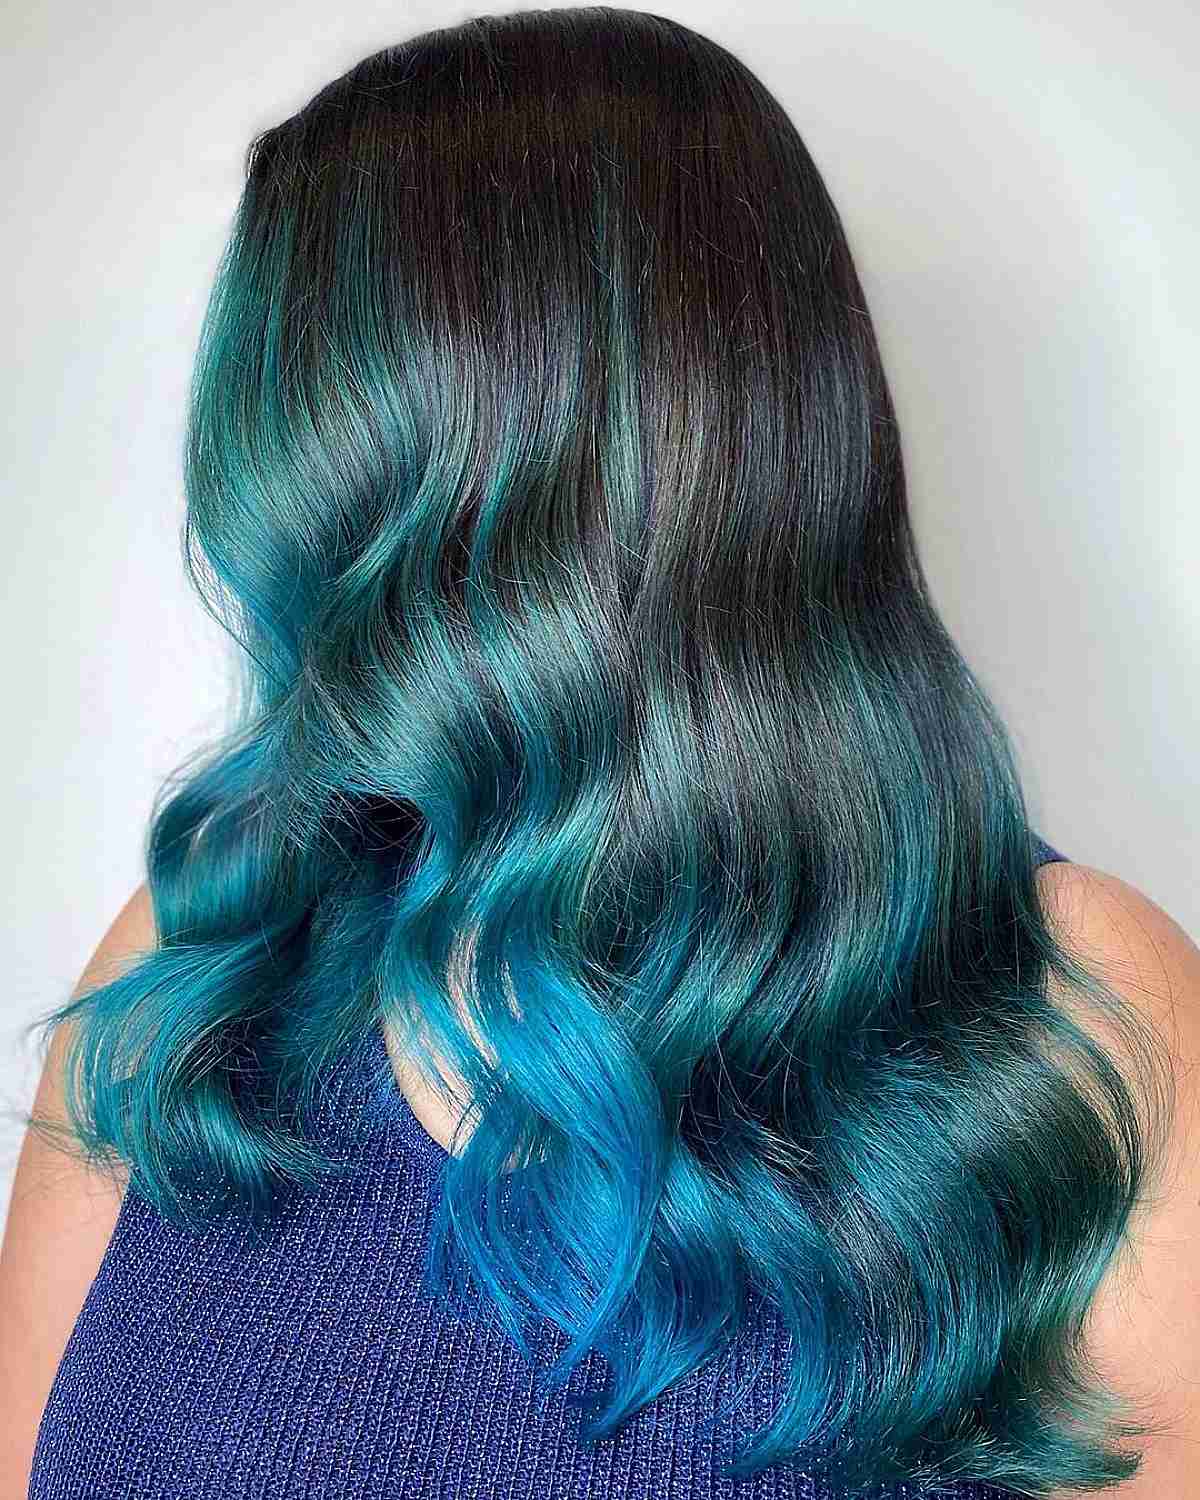 Blended Teal and Turquoise on Brunette Hair for Winter